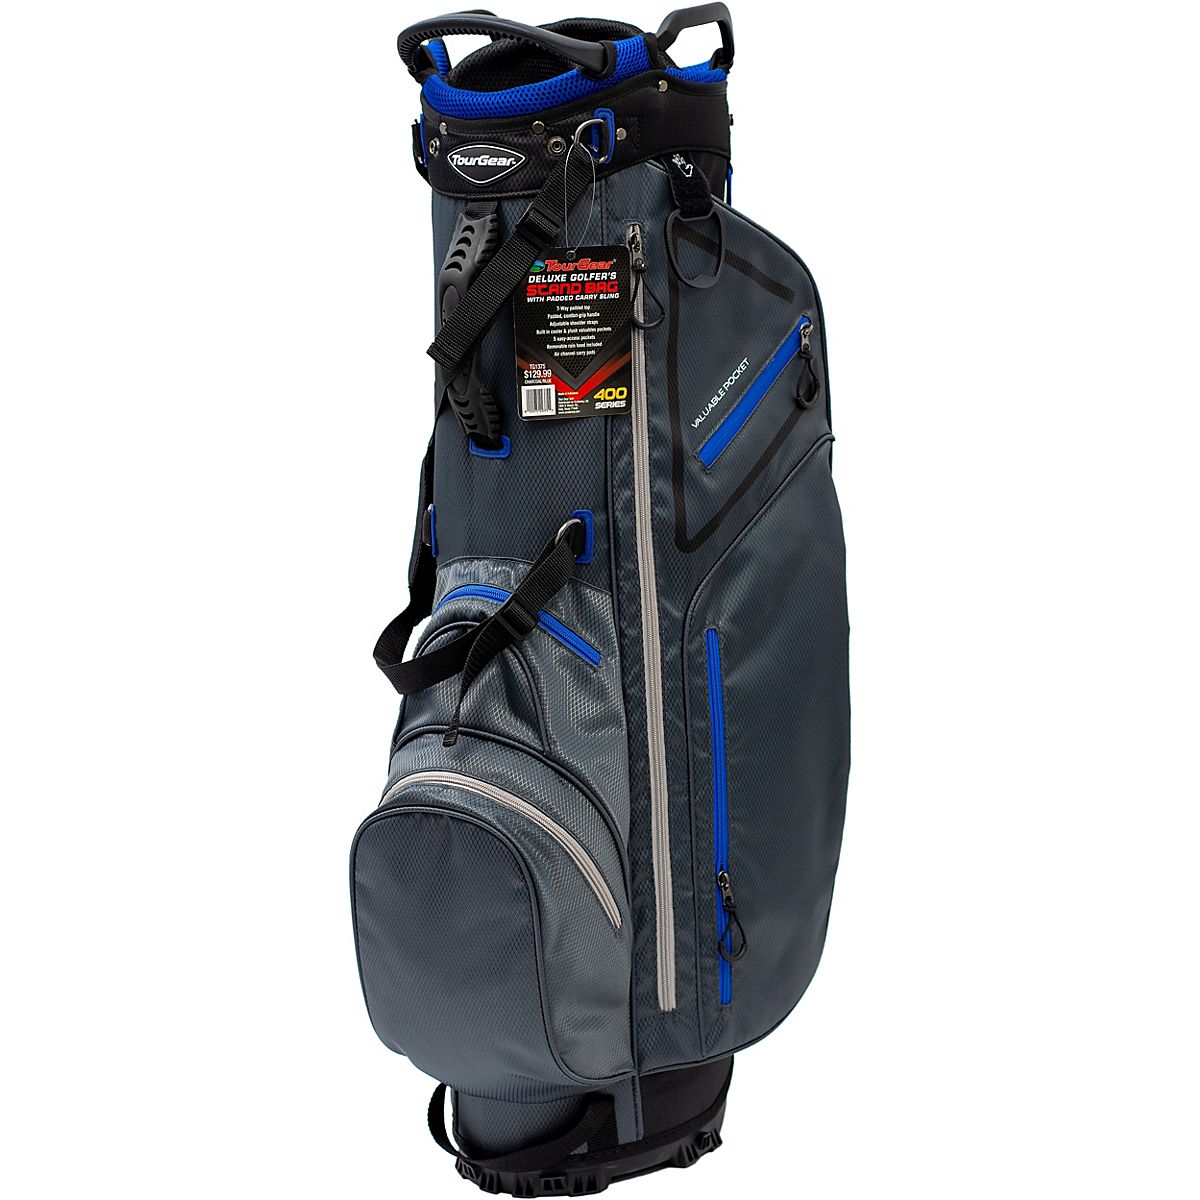 tour trek deluxe stand bag review